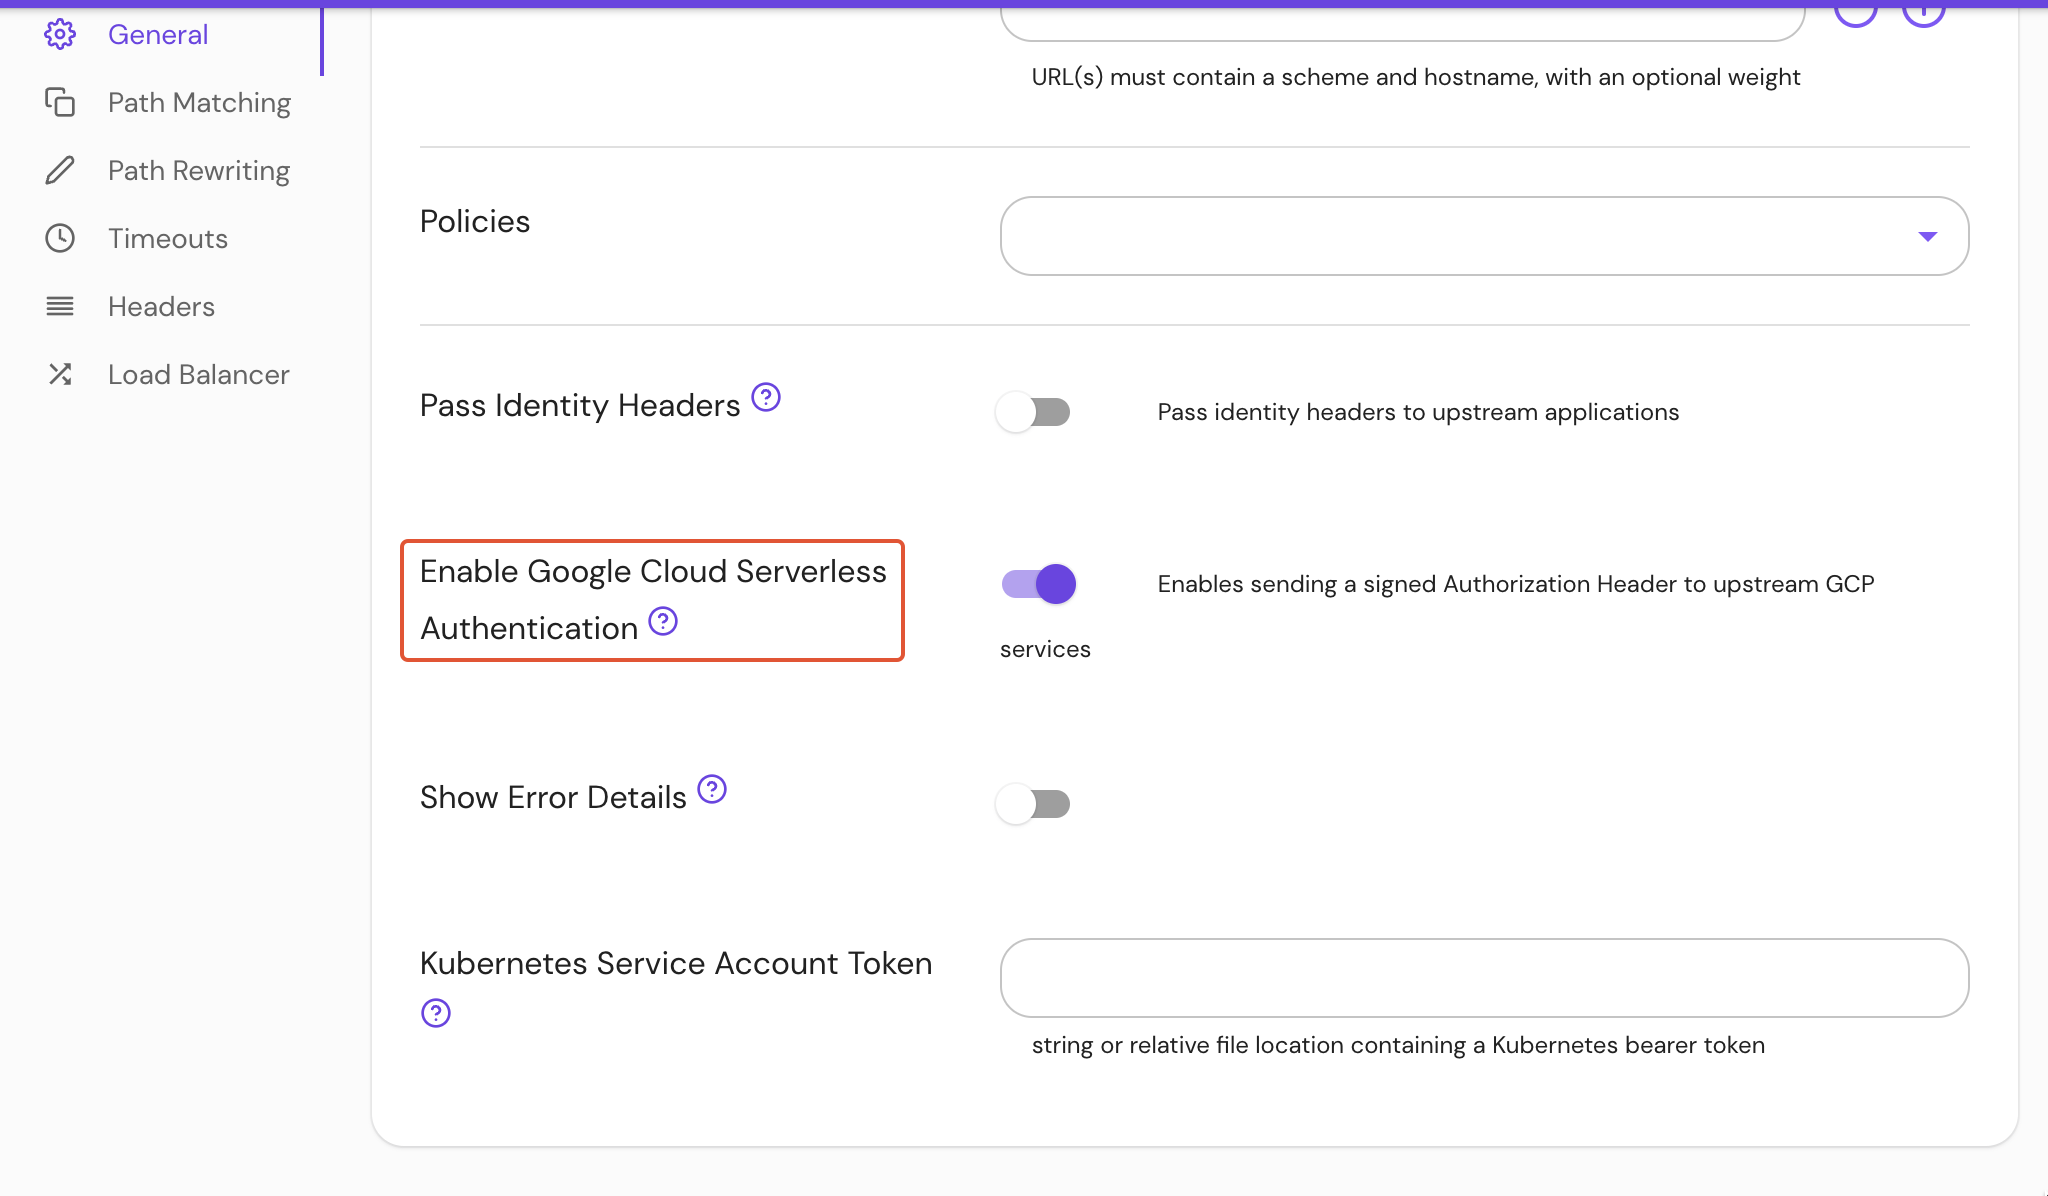 Enable Google Cloud Serverless Authentication under General route settings in the Console